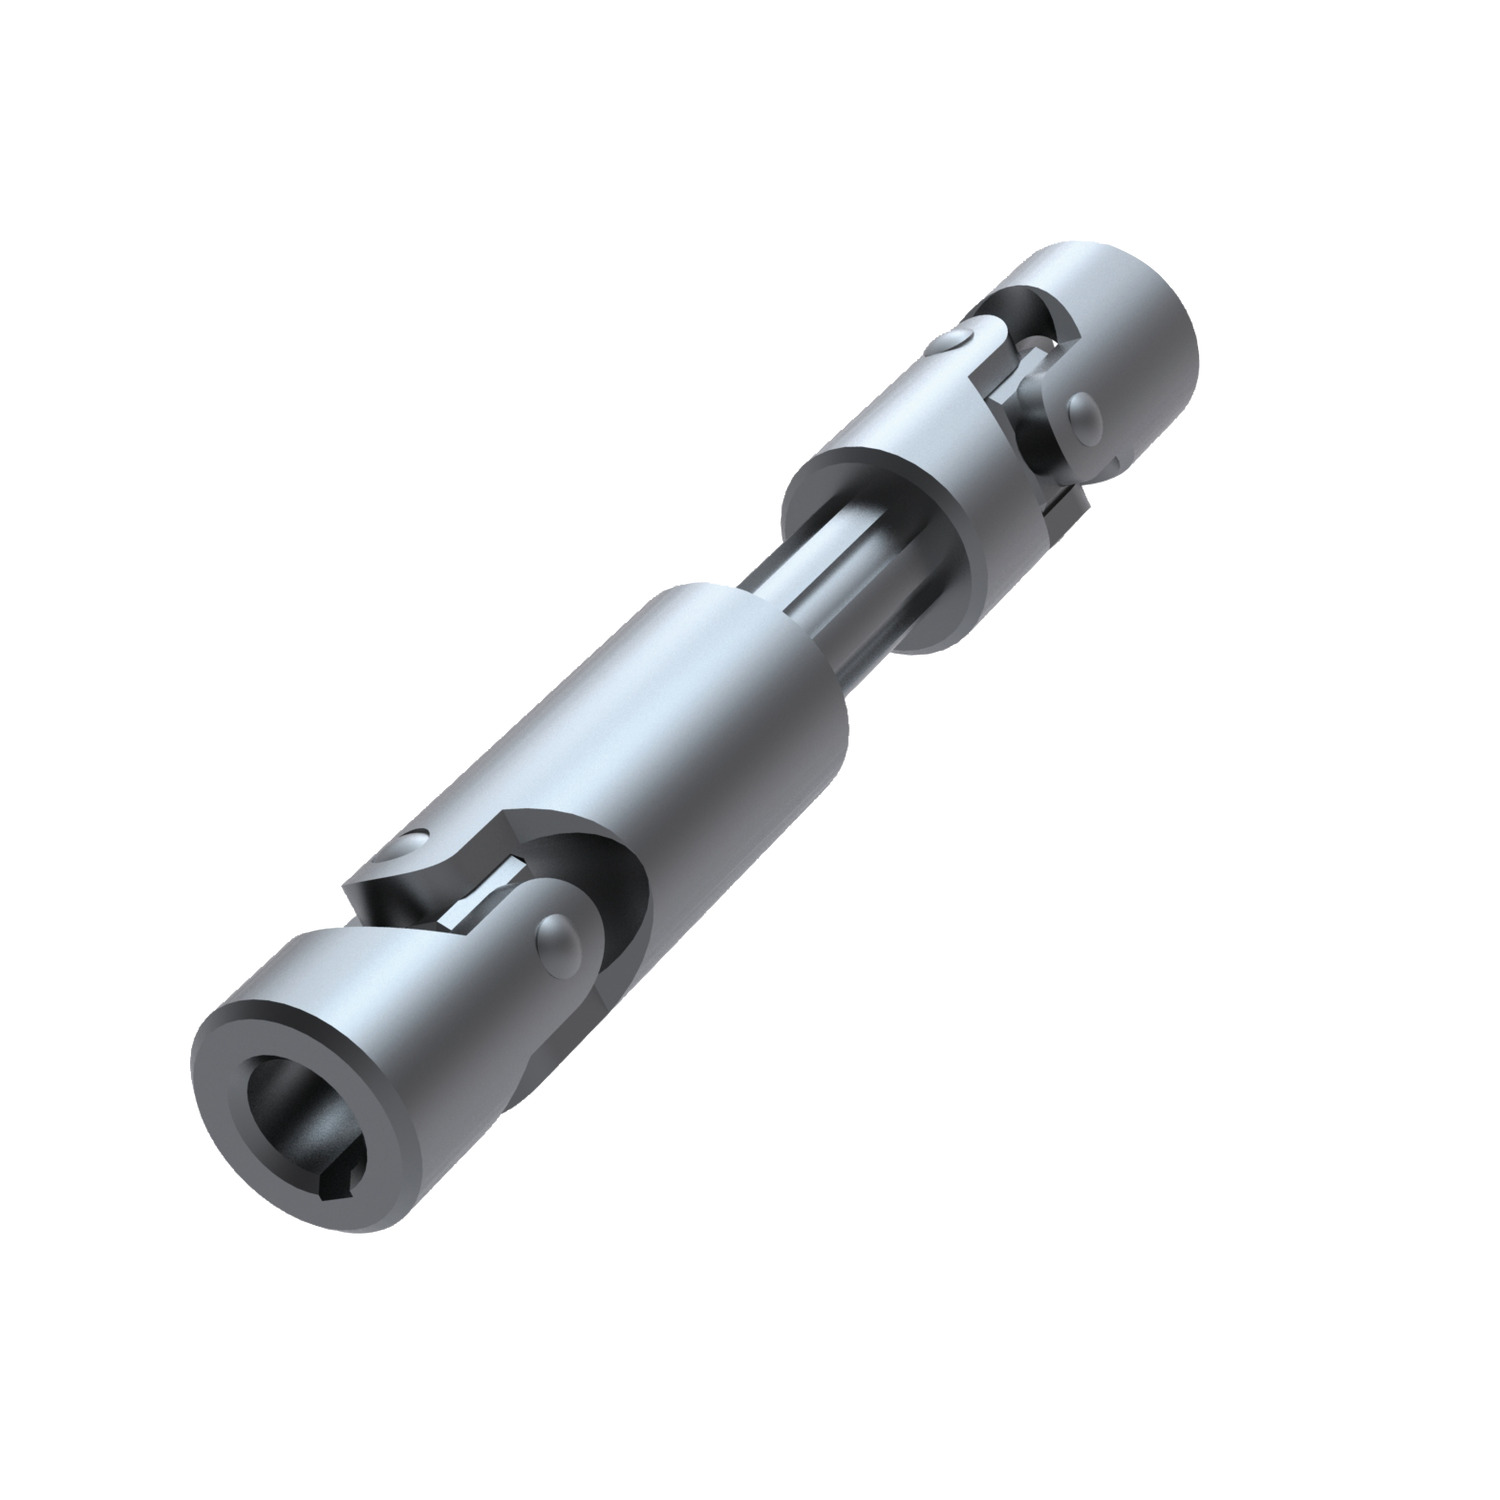 Telescopic Universal Joints Telescopic universal joints are used when two shafts that need connecting are positioned when, for example, A standard universal joint is too small to reach.